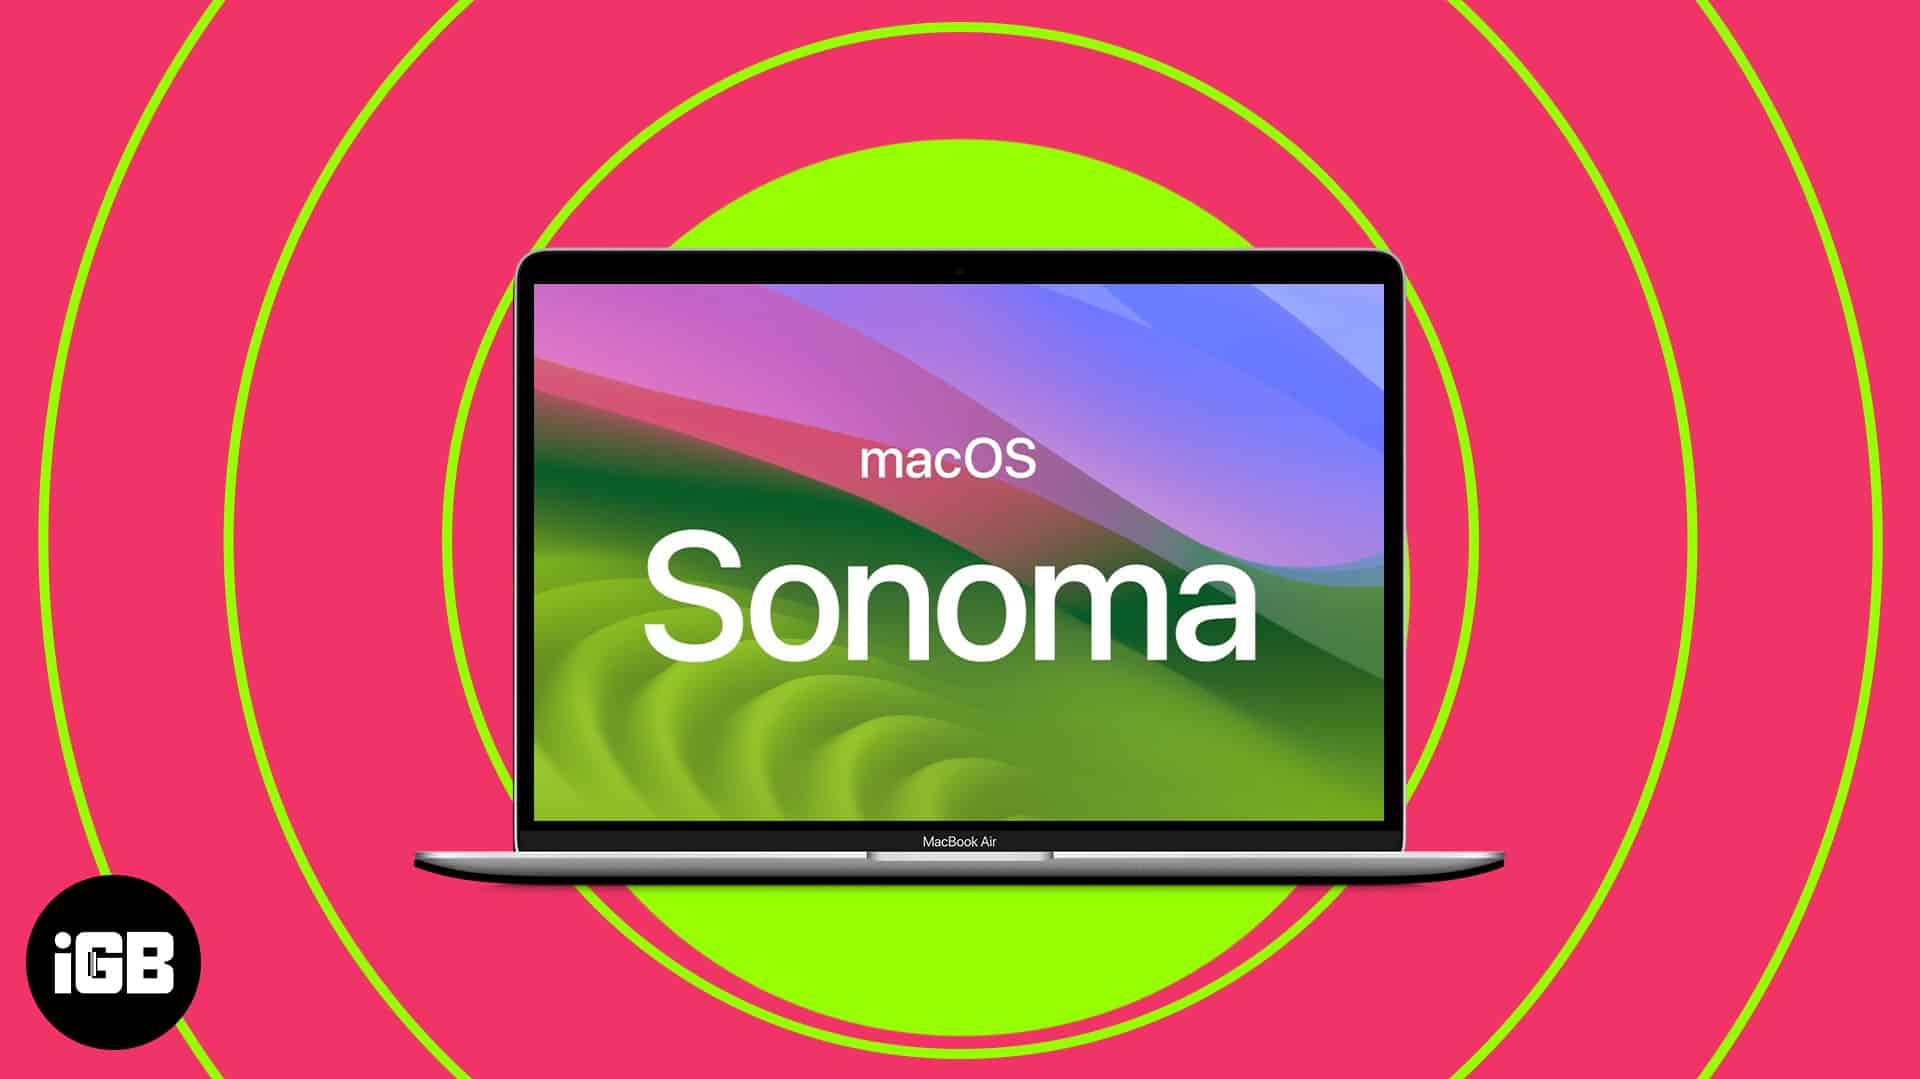 The Official Macos Sonoma Wallpaper Here Igeeks